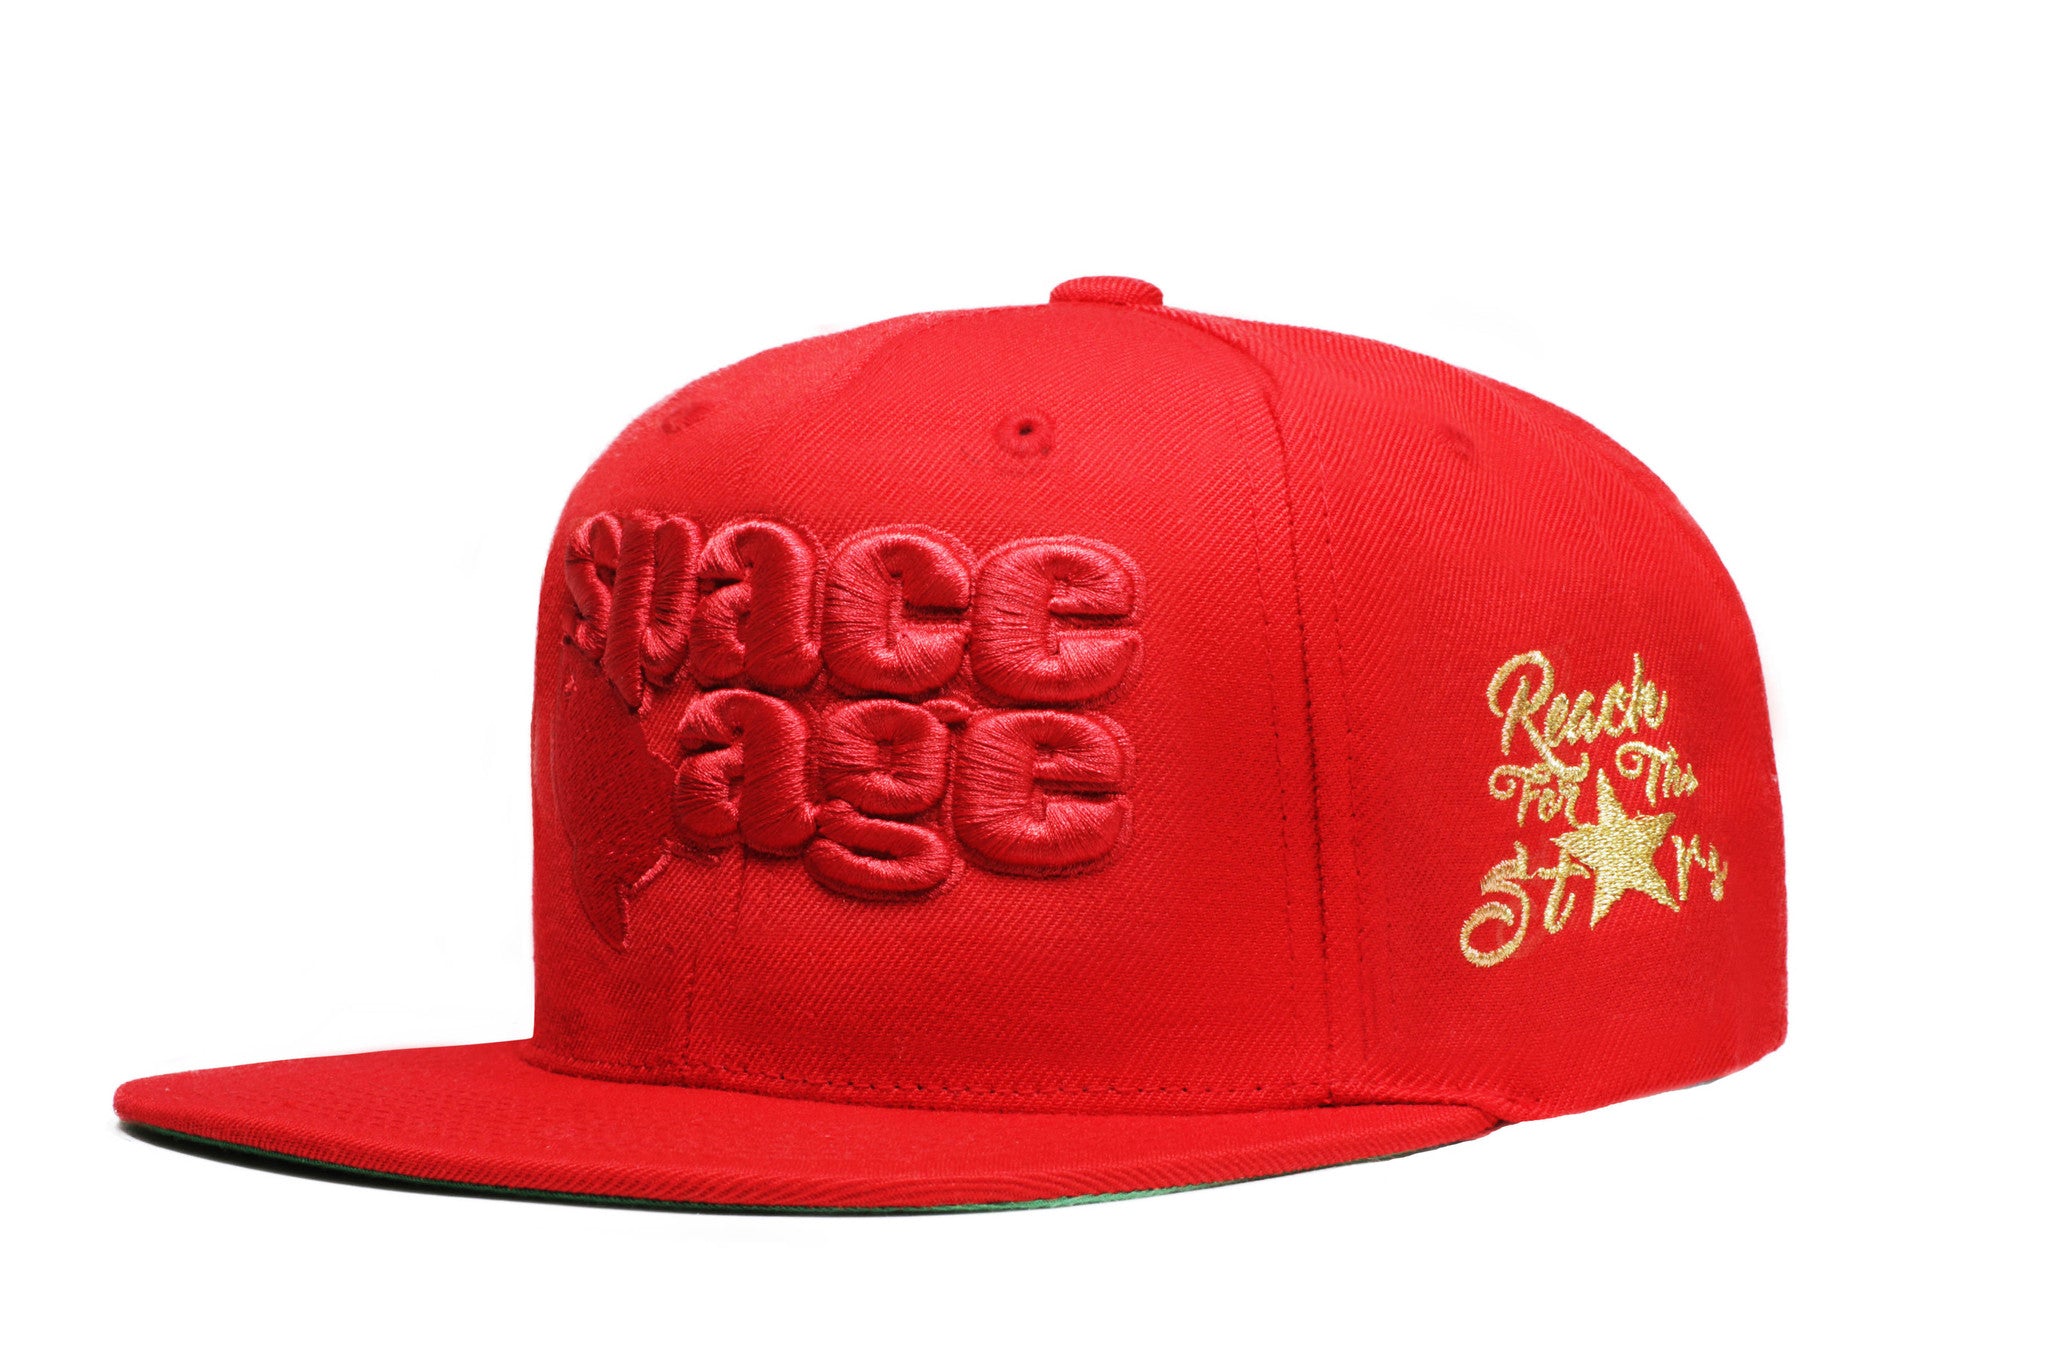 OG Space Age Snap Back  - Red / Red / Metallic Gold